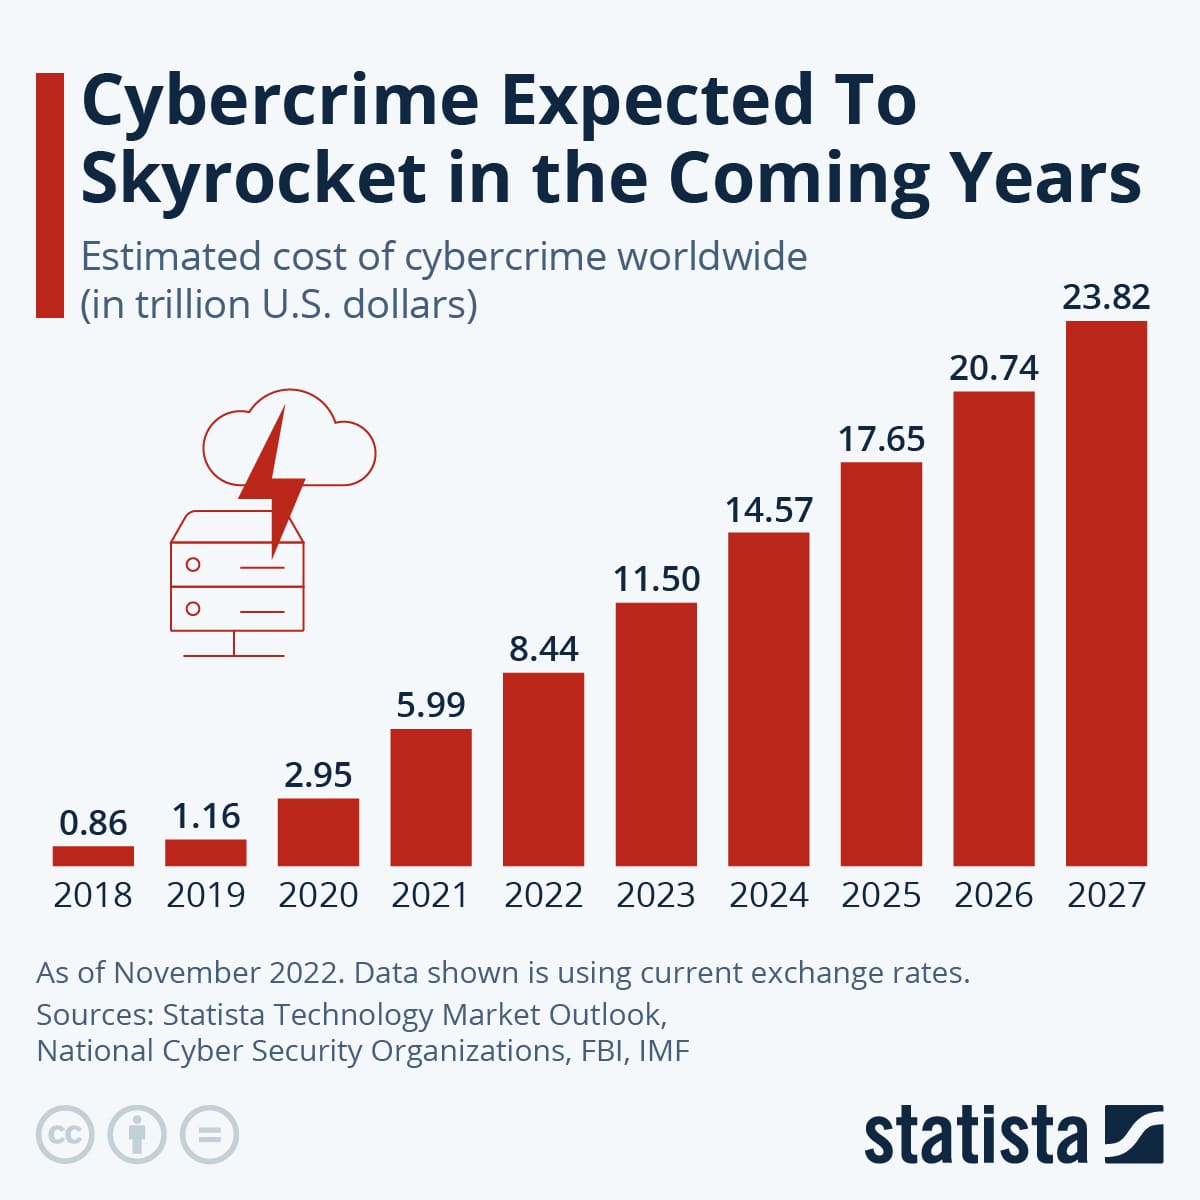 cybercrime expected to skyrocket in coming years infographic